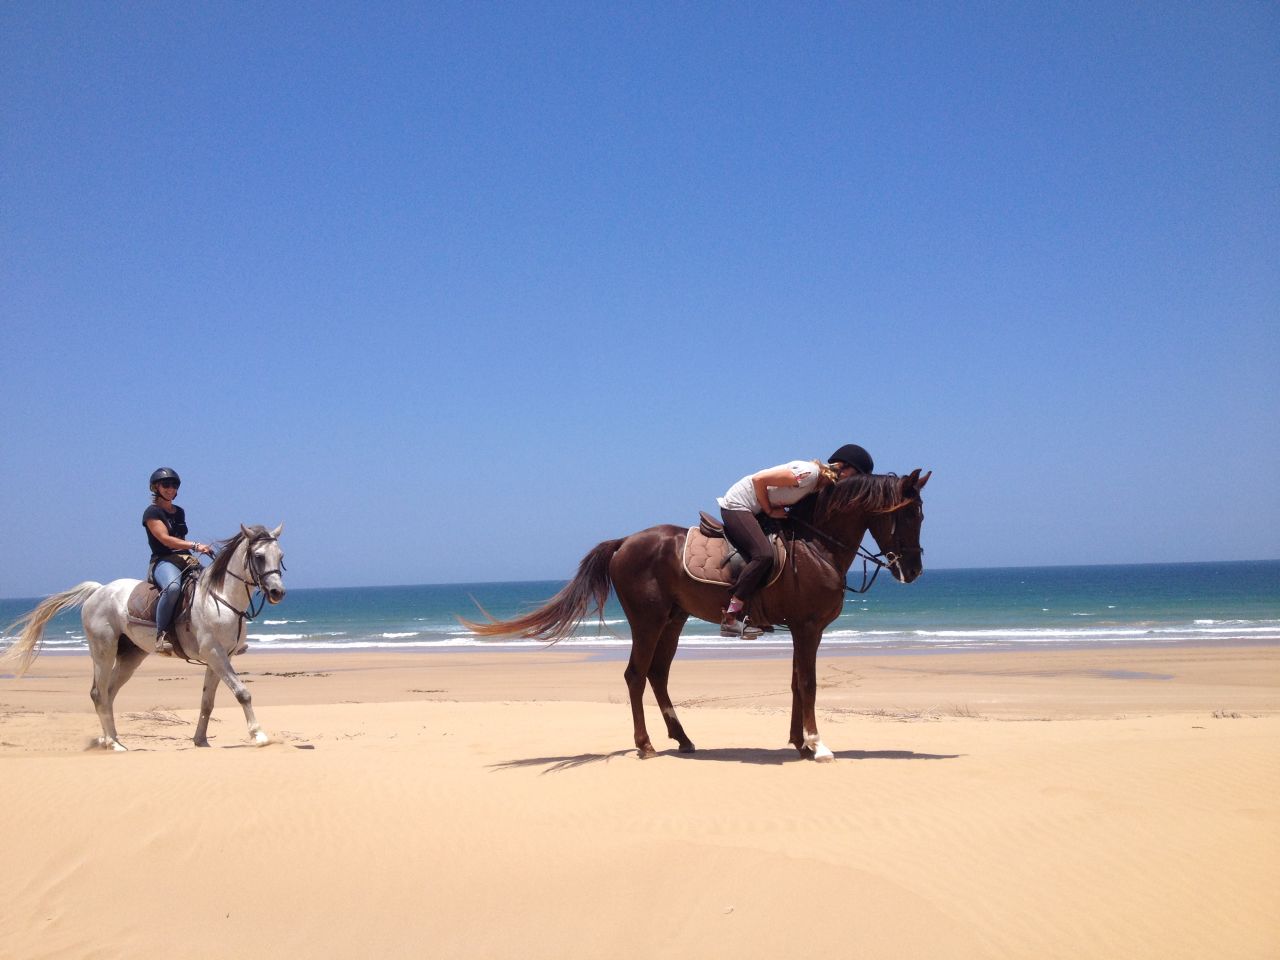 Requiring less commitment, there's plenty of options if you want to have a ride along Essaouira's main beach.